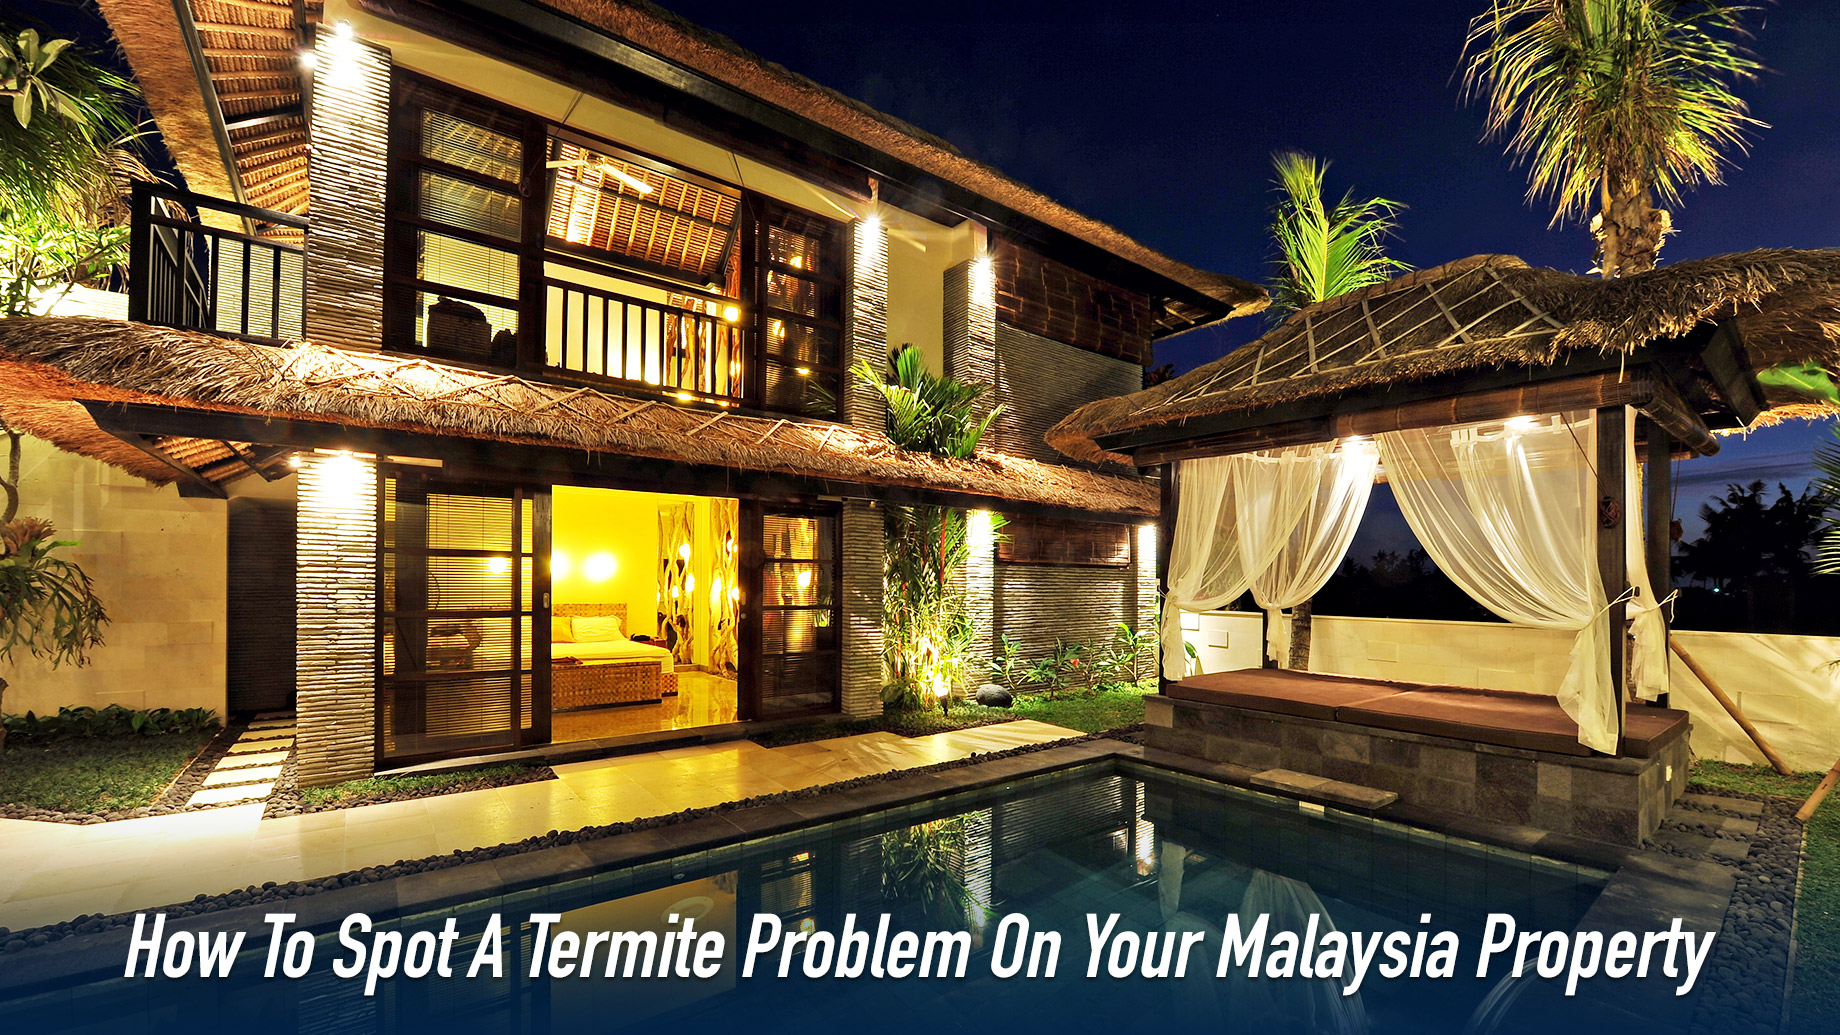 How To Spot A Termite Problem On Your Malaysia Property